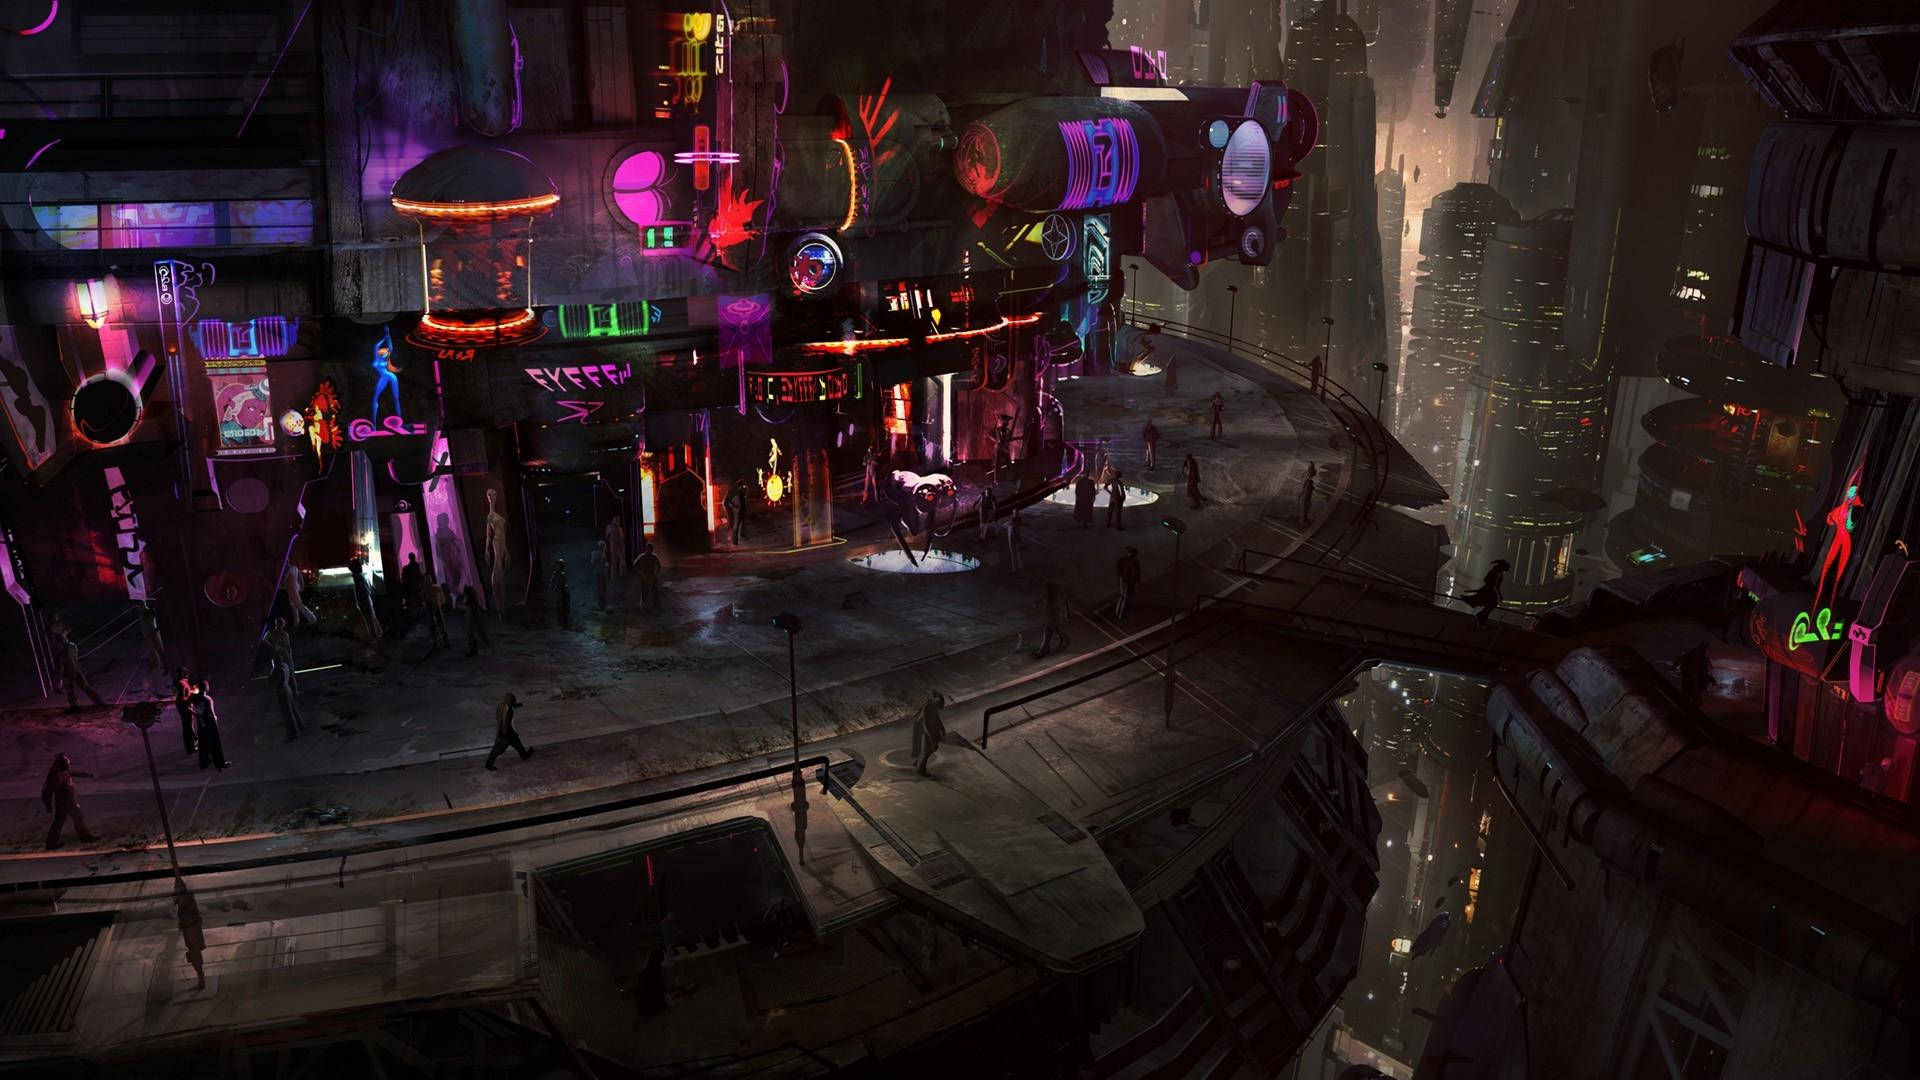 Uncommon Place In The City Of Cyberpunk Background